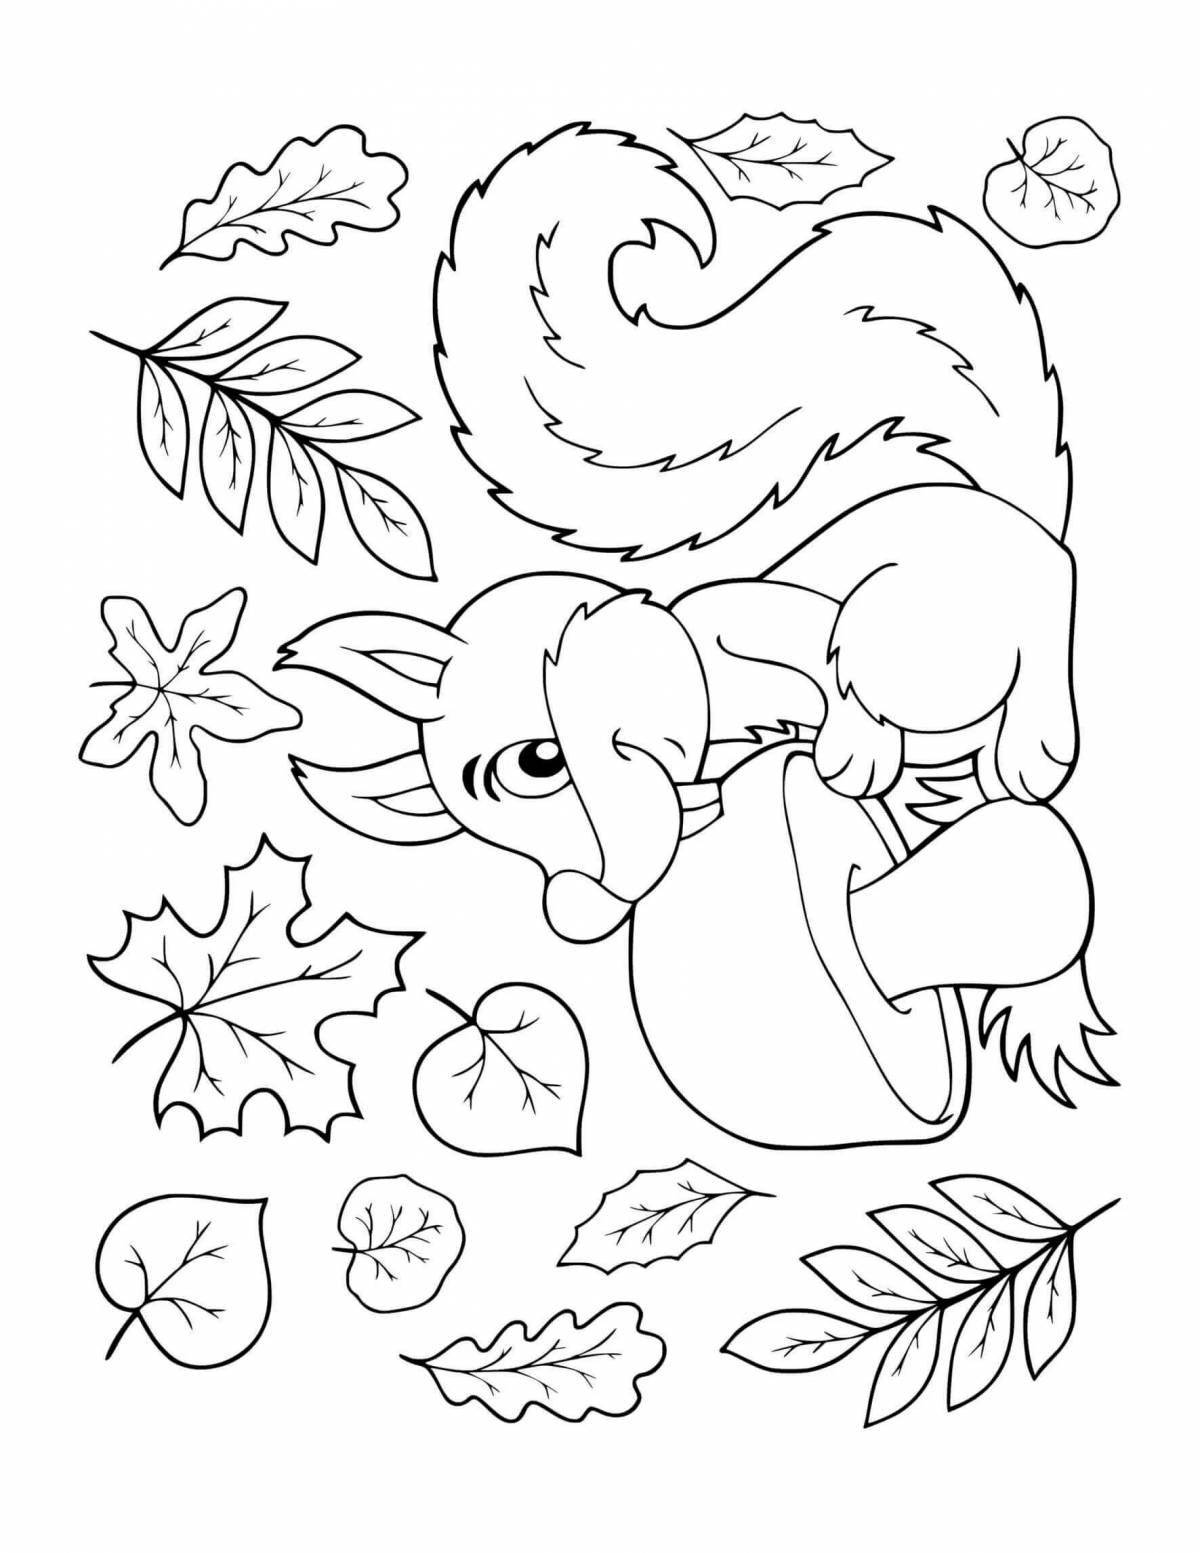 Glitter autumn coloring book for 6-7 year olds